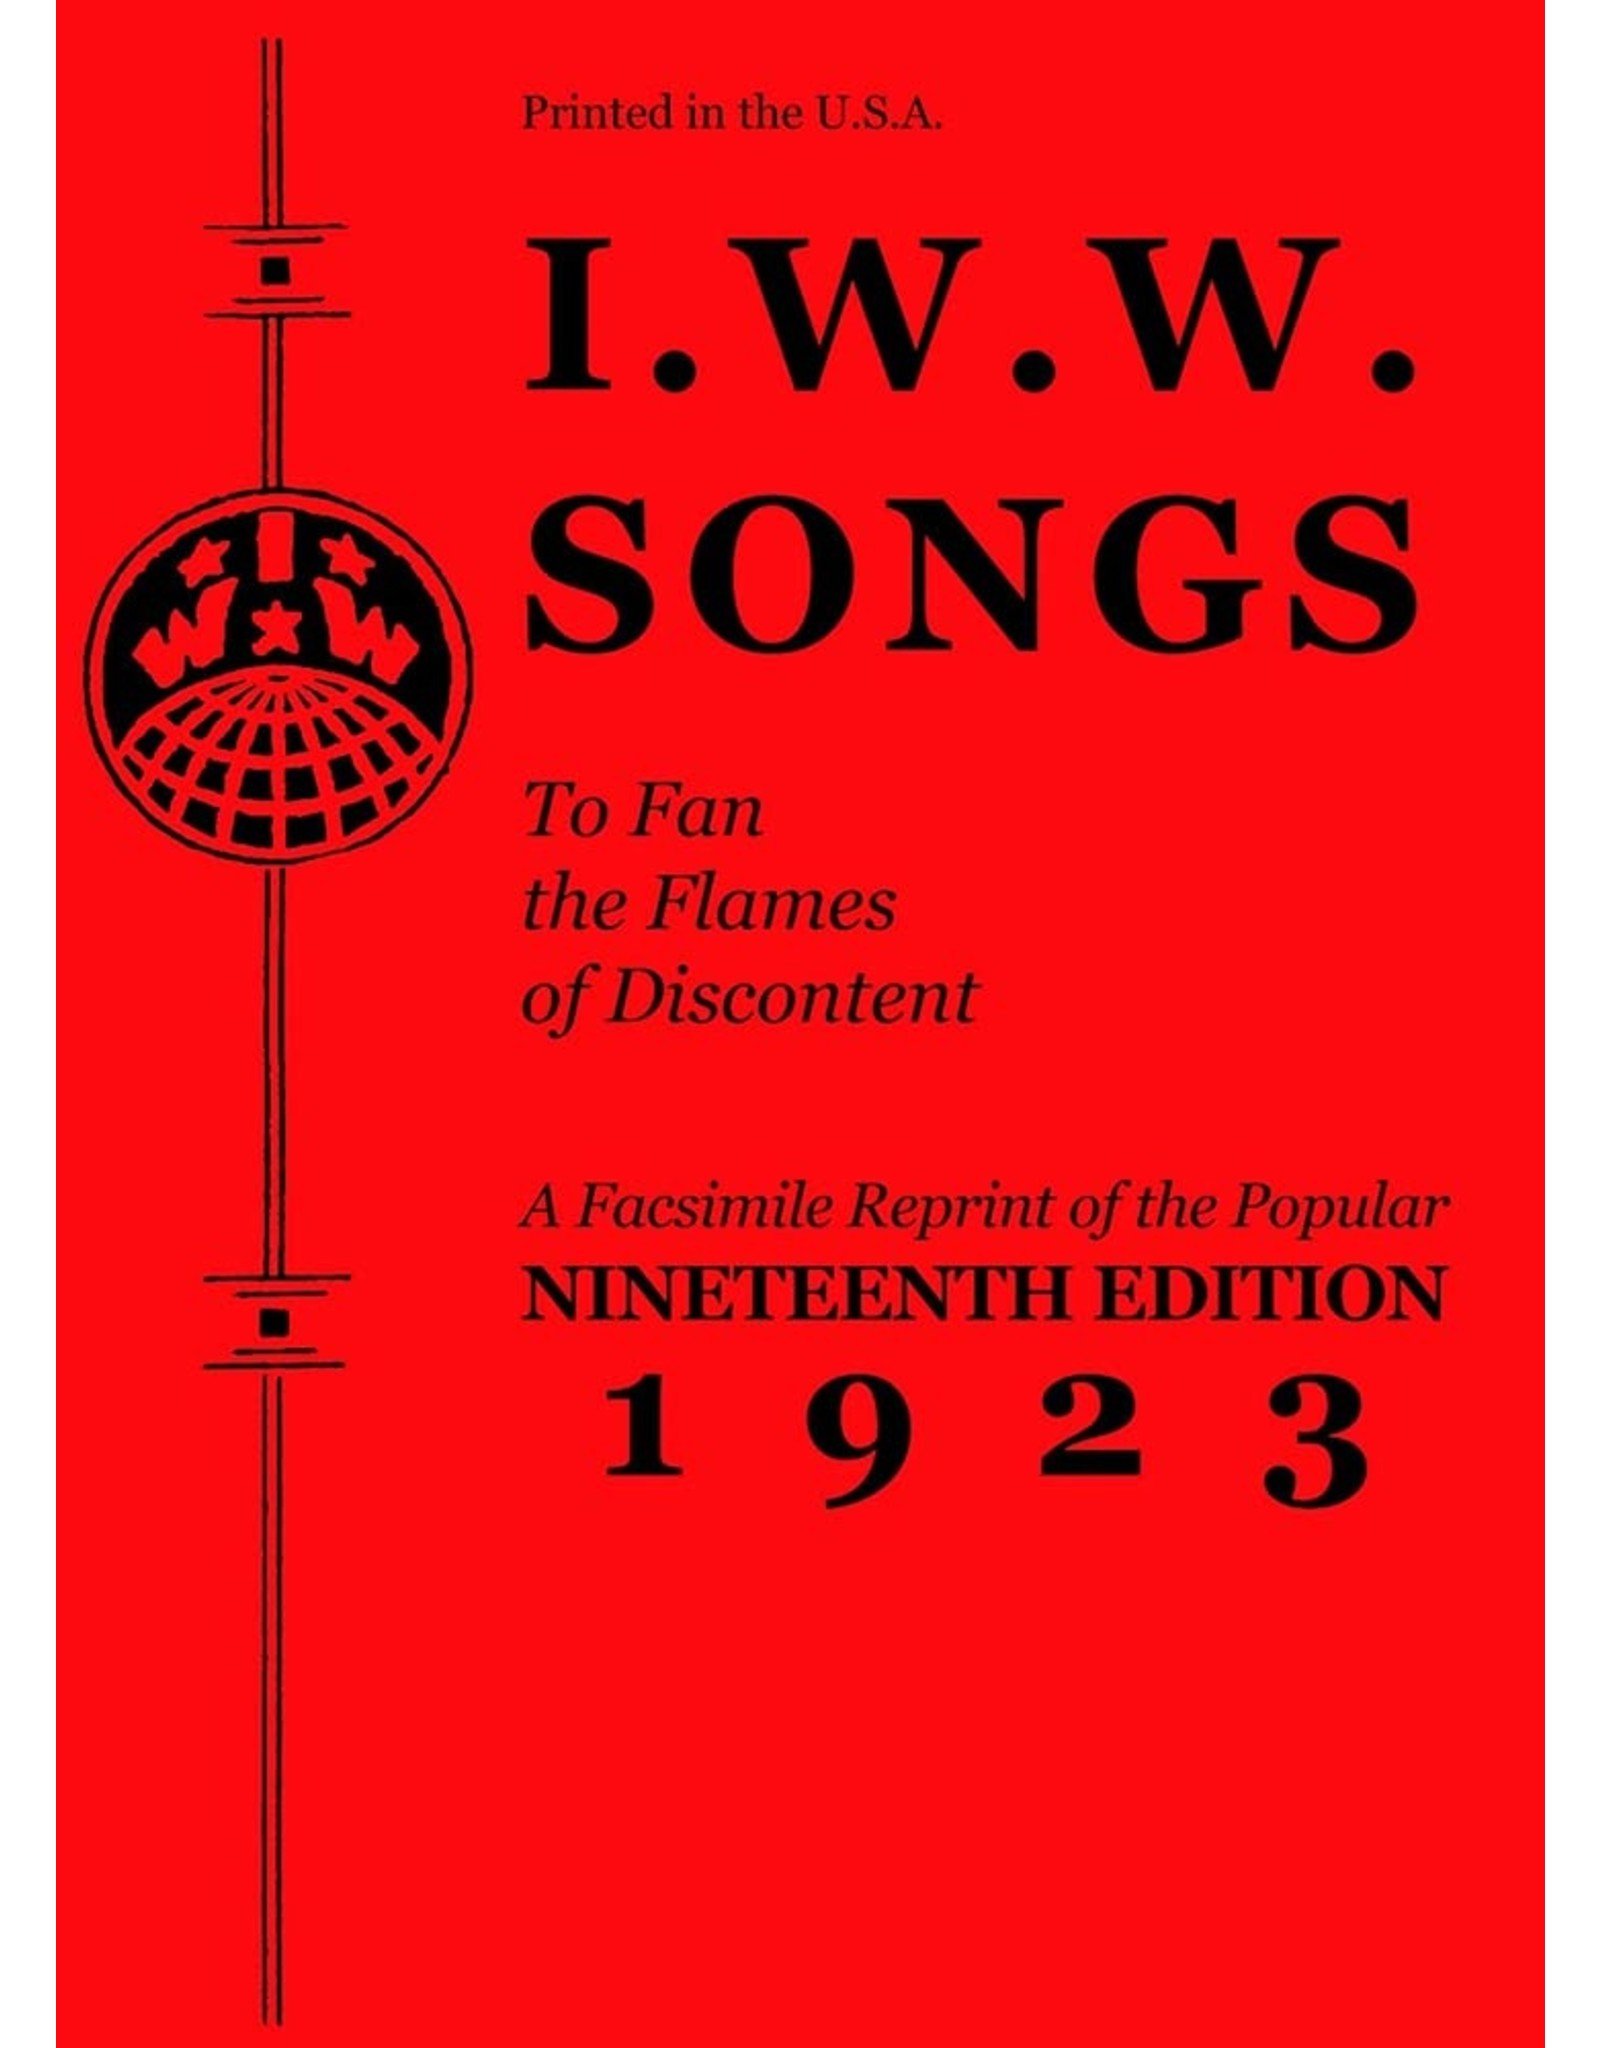 Literature I.W.W. Songs: To Fan the Flames of Discontent, A Facsimile Reprint of the Popular Nineteenth Edition